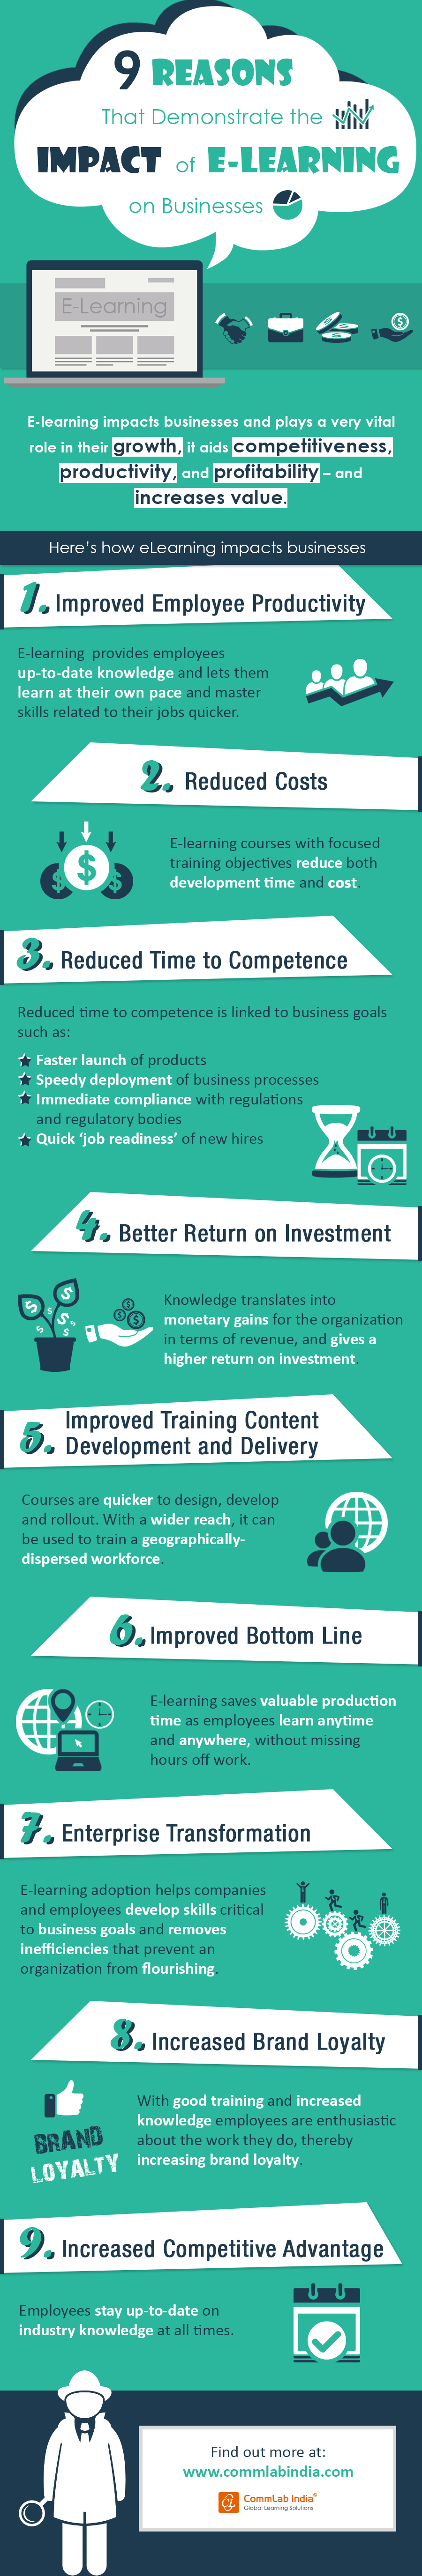 9 Reasons That Demonstrate the Impact of E-learning on Businesses [Infographic]